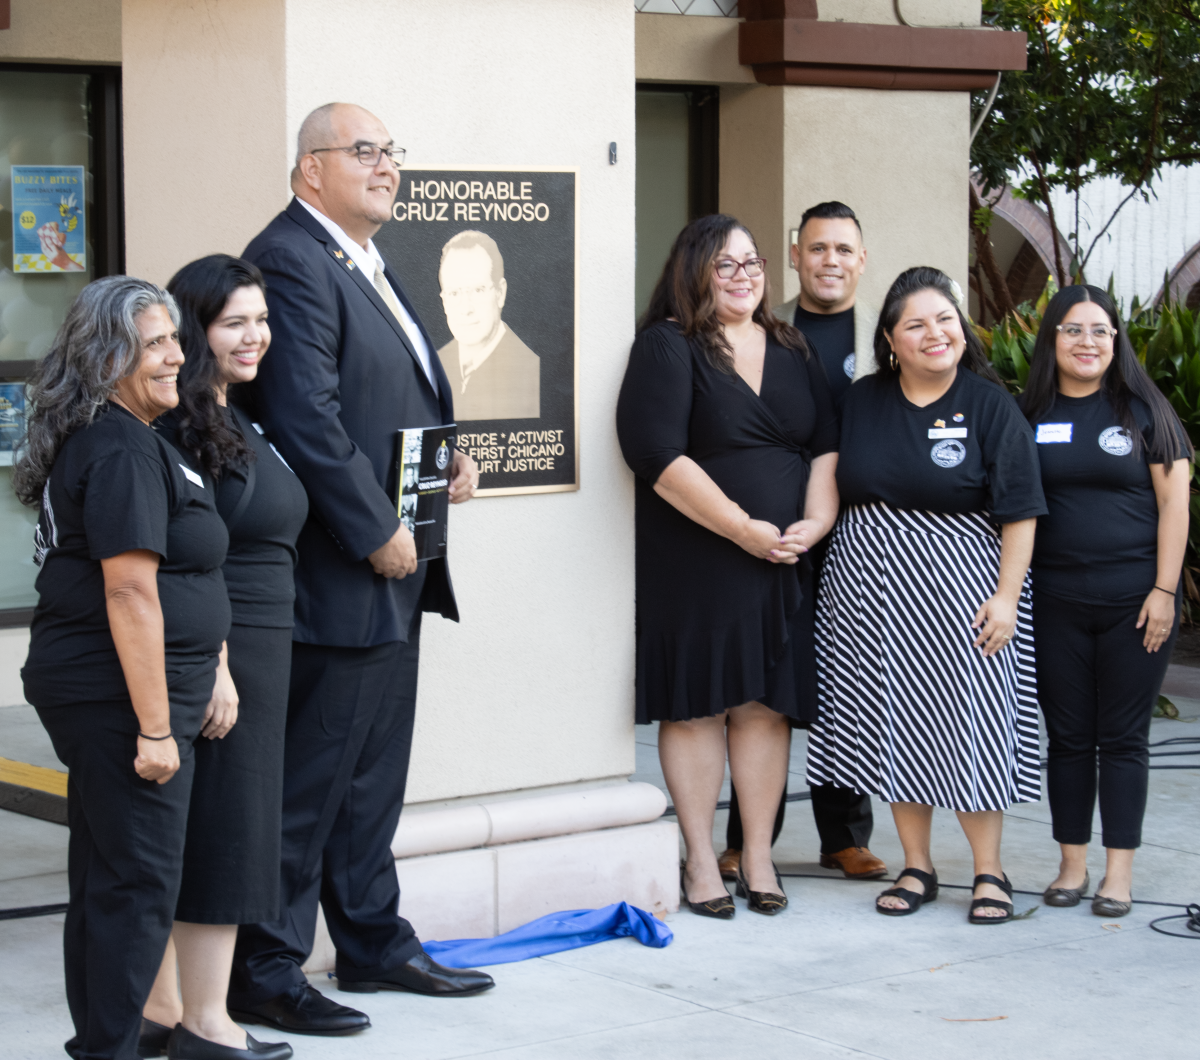 (From left to right) Monica Ernandez, Connie Moreno Yamashiro, Gilbert Contreras, Cynthia Olivo, Carlos Ayon, Citlally Santana, and Jeanette Rodriguez. This group of Faculty members organized the final celebration of the Cruz Reynoso Hall  on Thursday, Sept. 14, 2023.